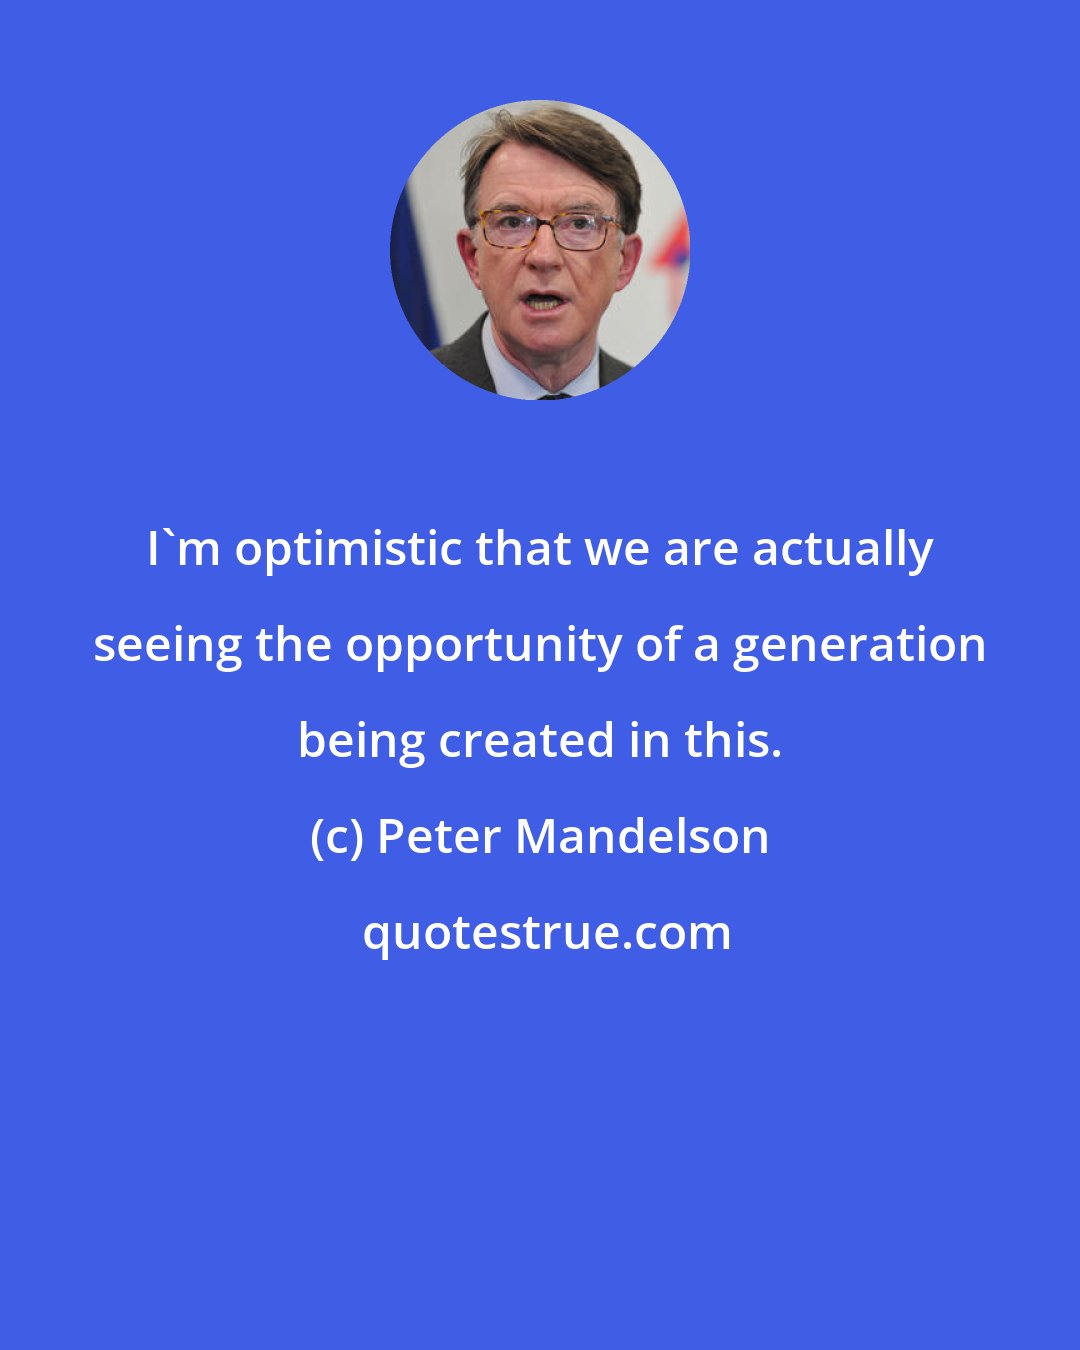 Peter Mandelson: I'm optimistic that we are actually seeing the opportunity of a generation being created in this.